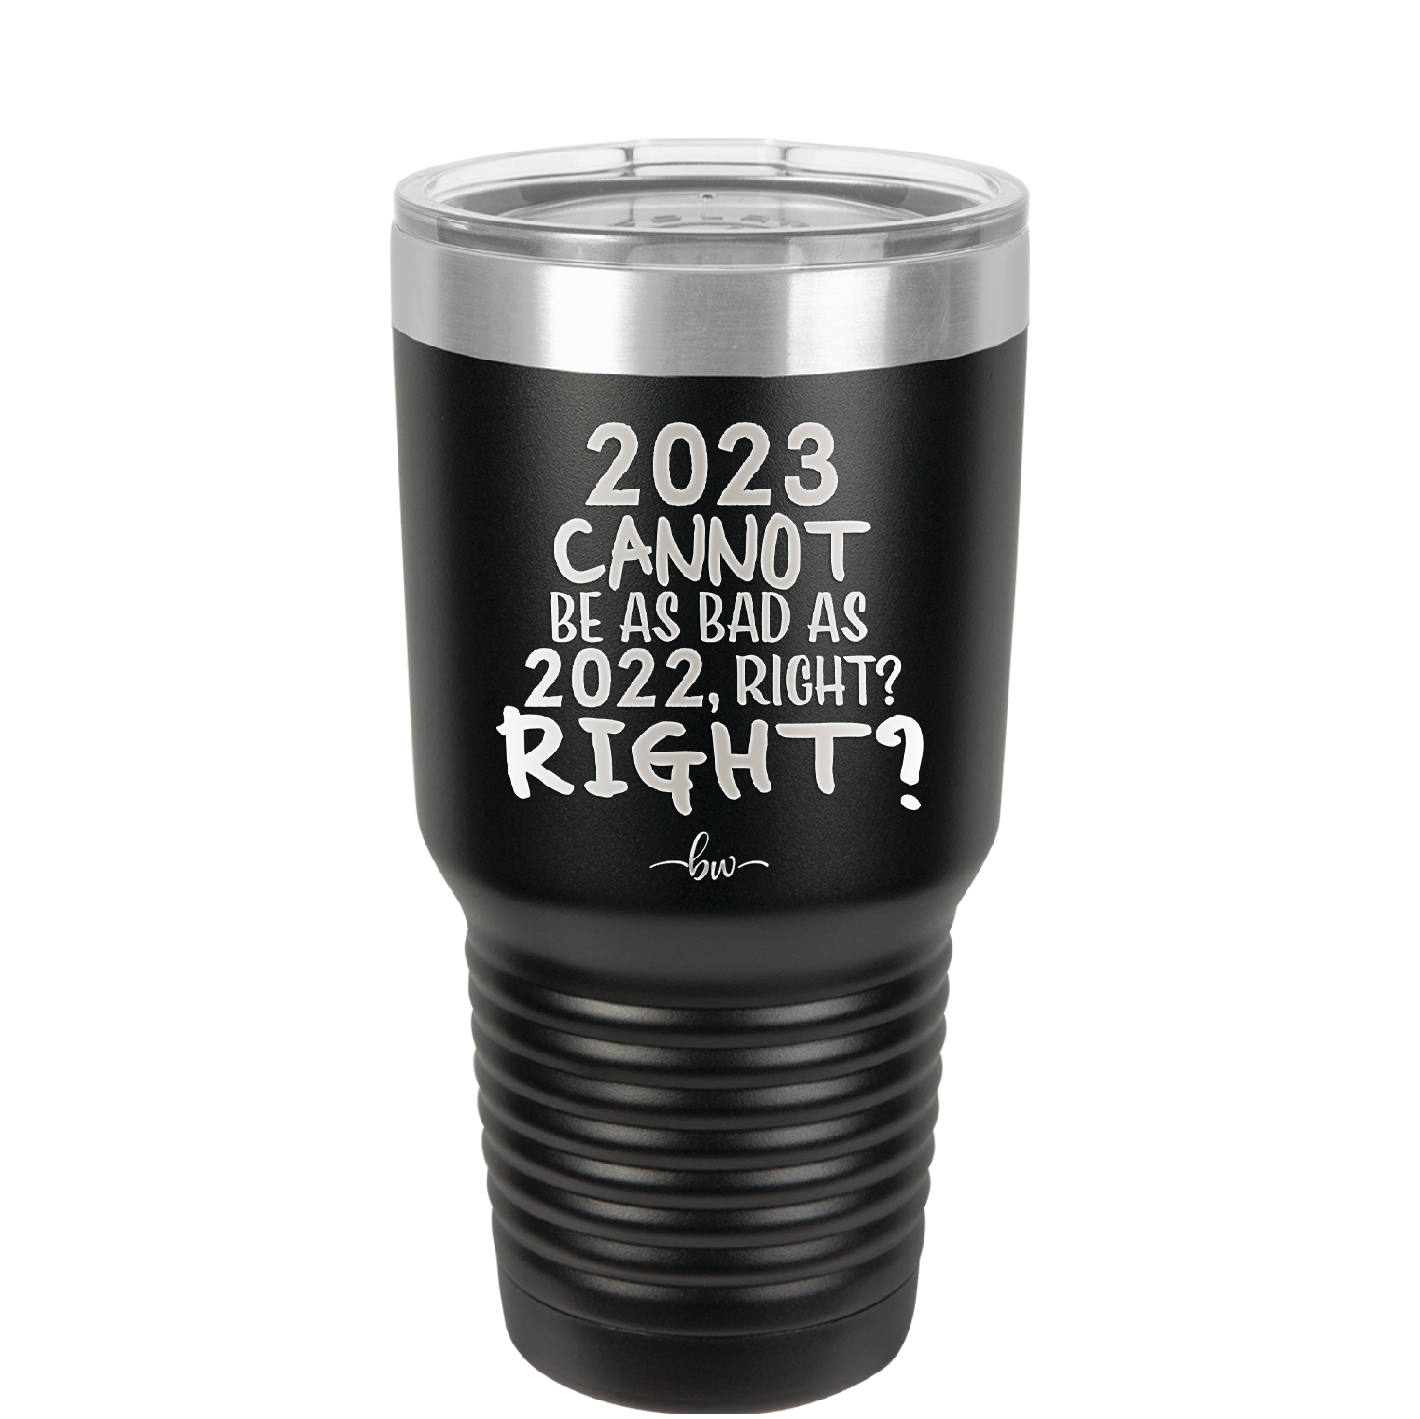 30 oz 2023 cannot be as bas as 2022, right?right? - black